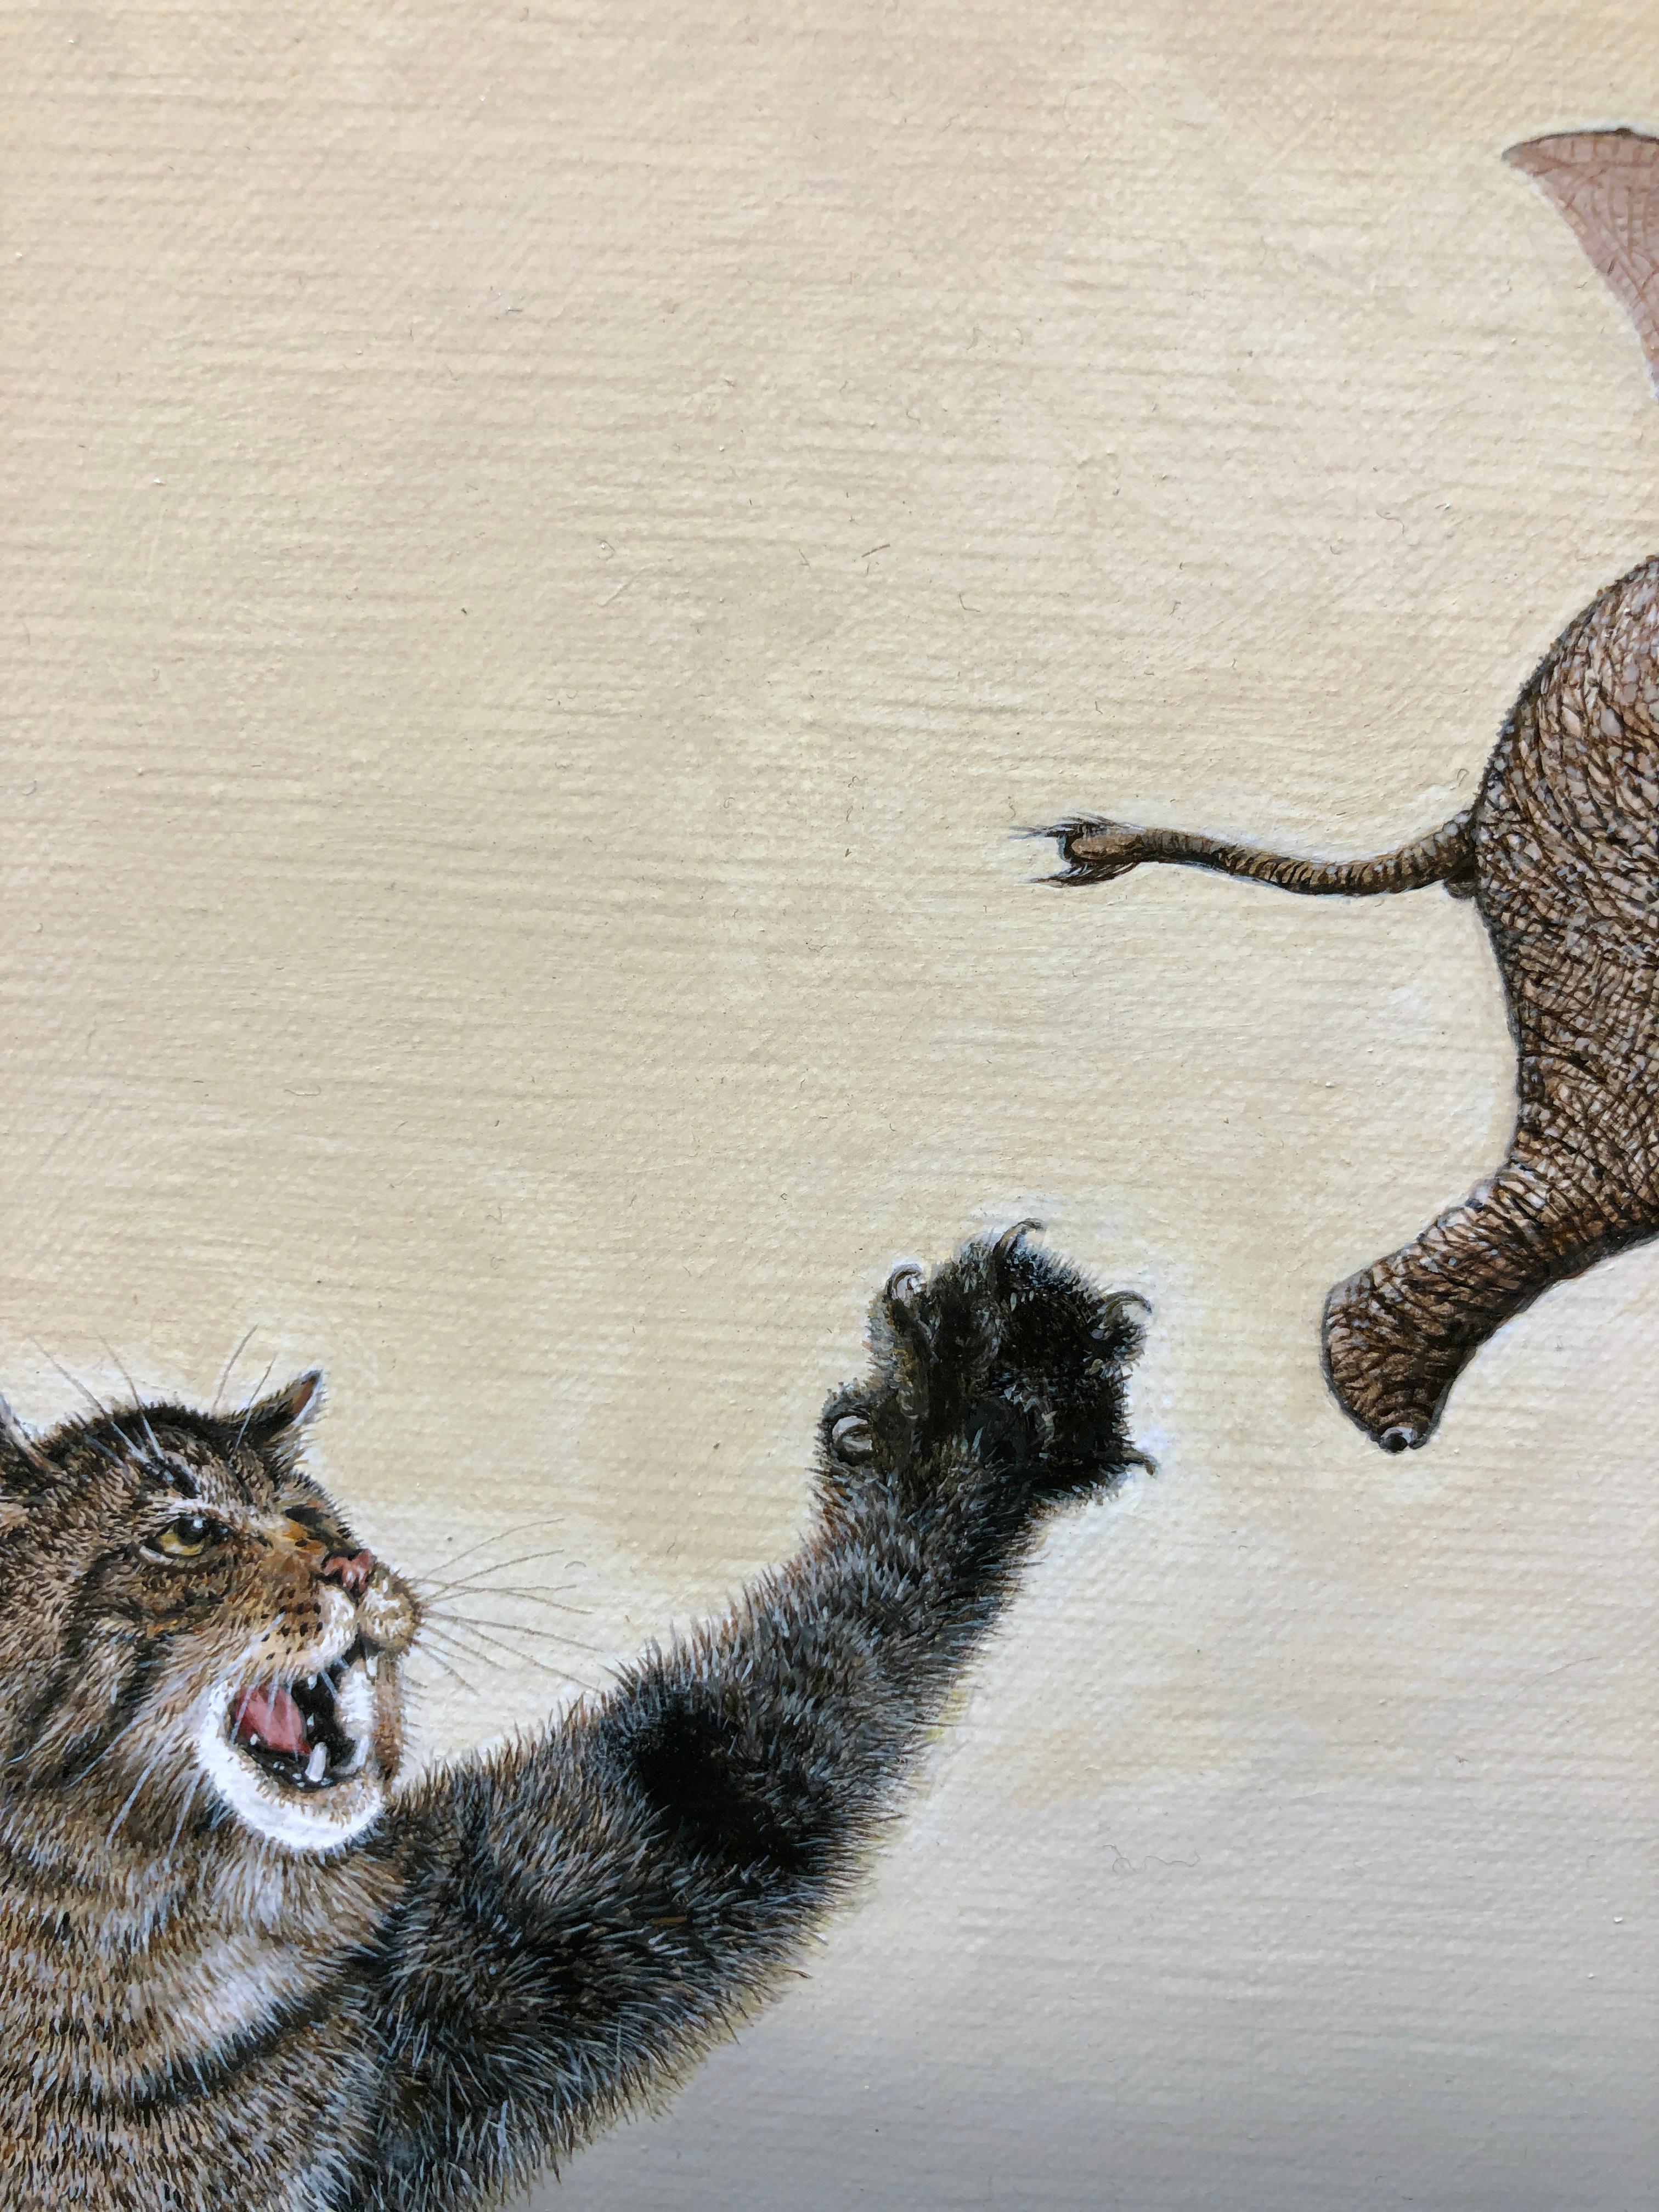 Cat as Catch Can
During the Renaissance, the popular sport of “catry” (similar to the sport of falconry) was so successful that it caused the extinction of the Dwarf Bat-Eared Flying Elephant of Northern Europe.  

Christopher A. Klein
Cat as Catch